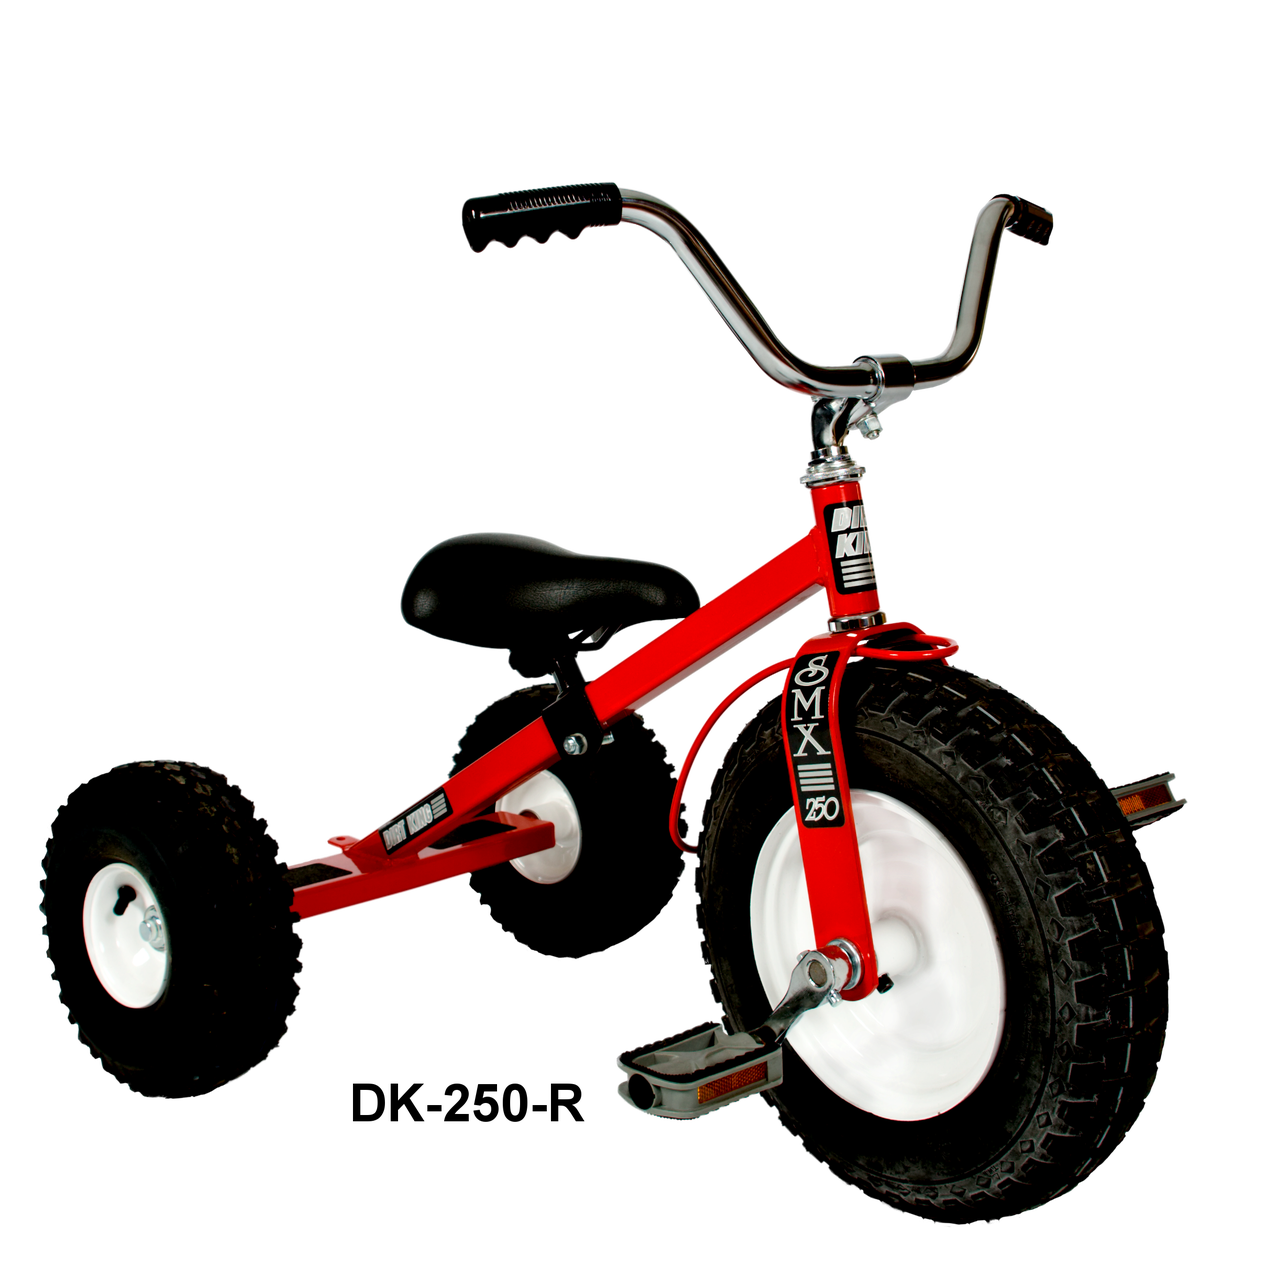 children's tricycle for sale